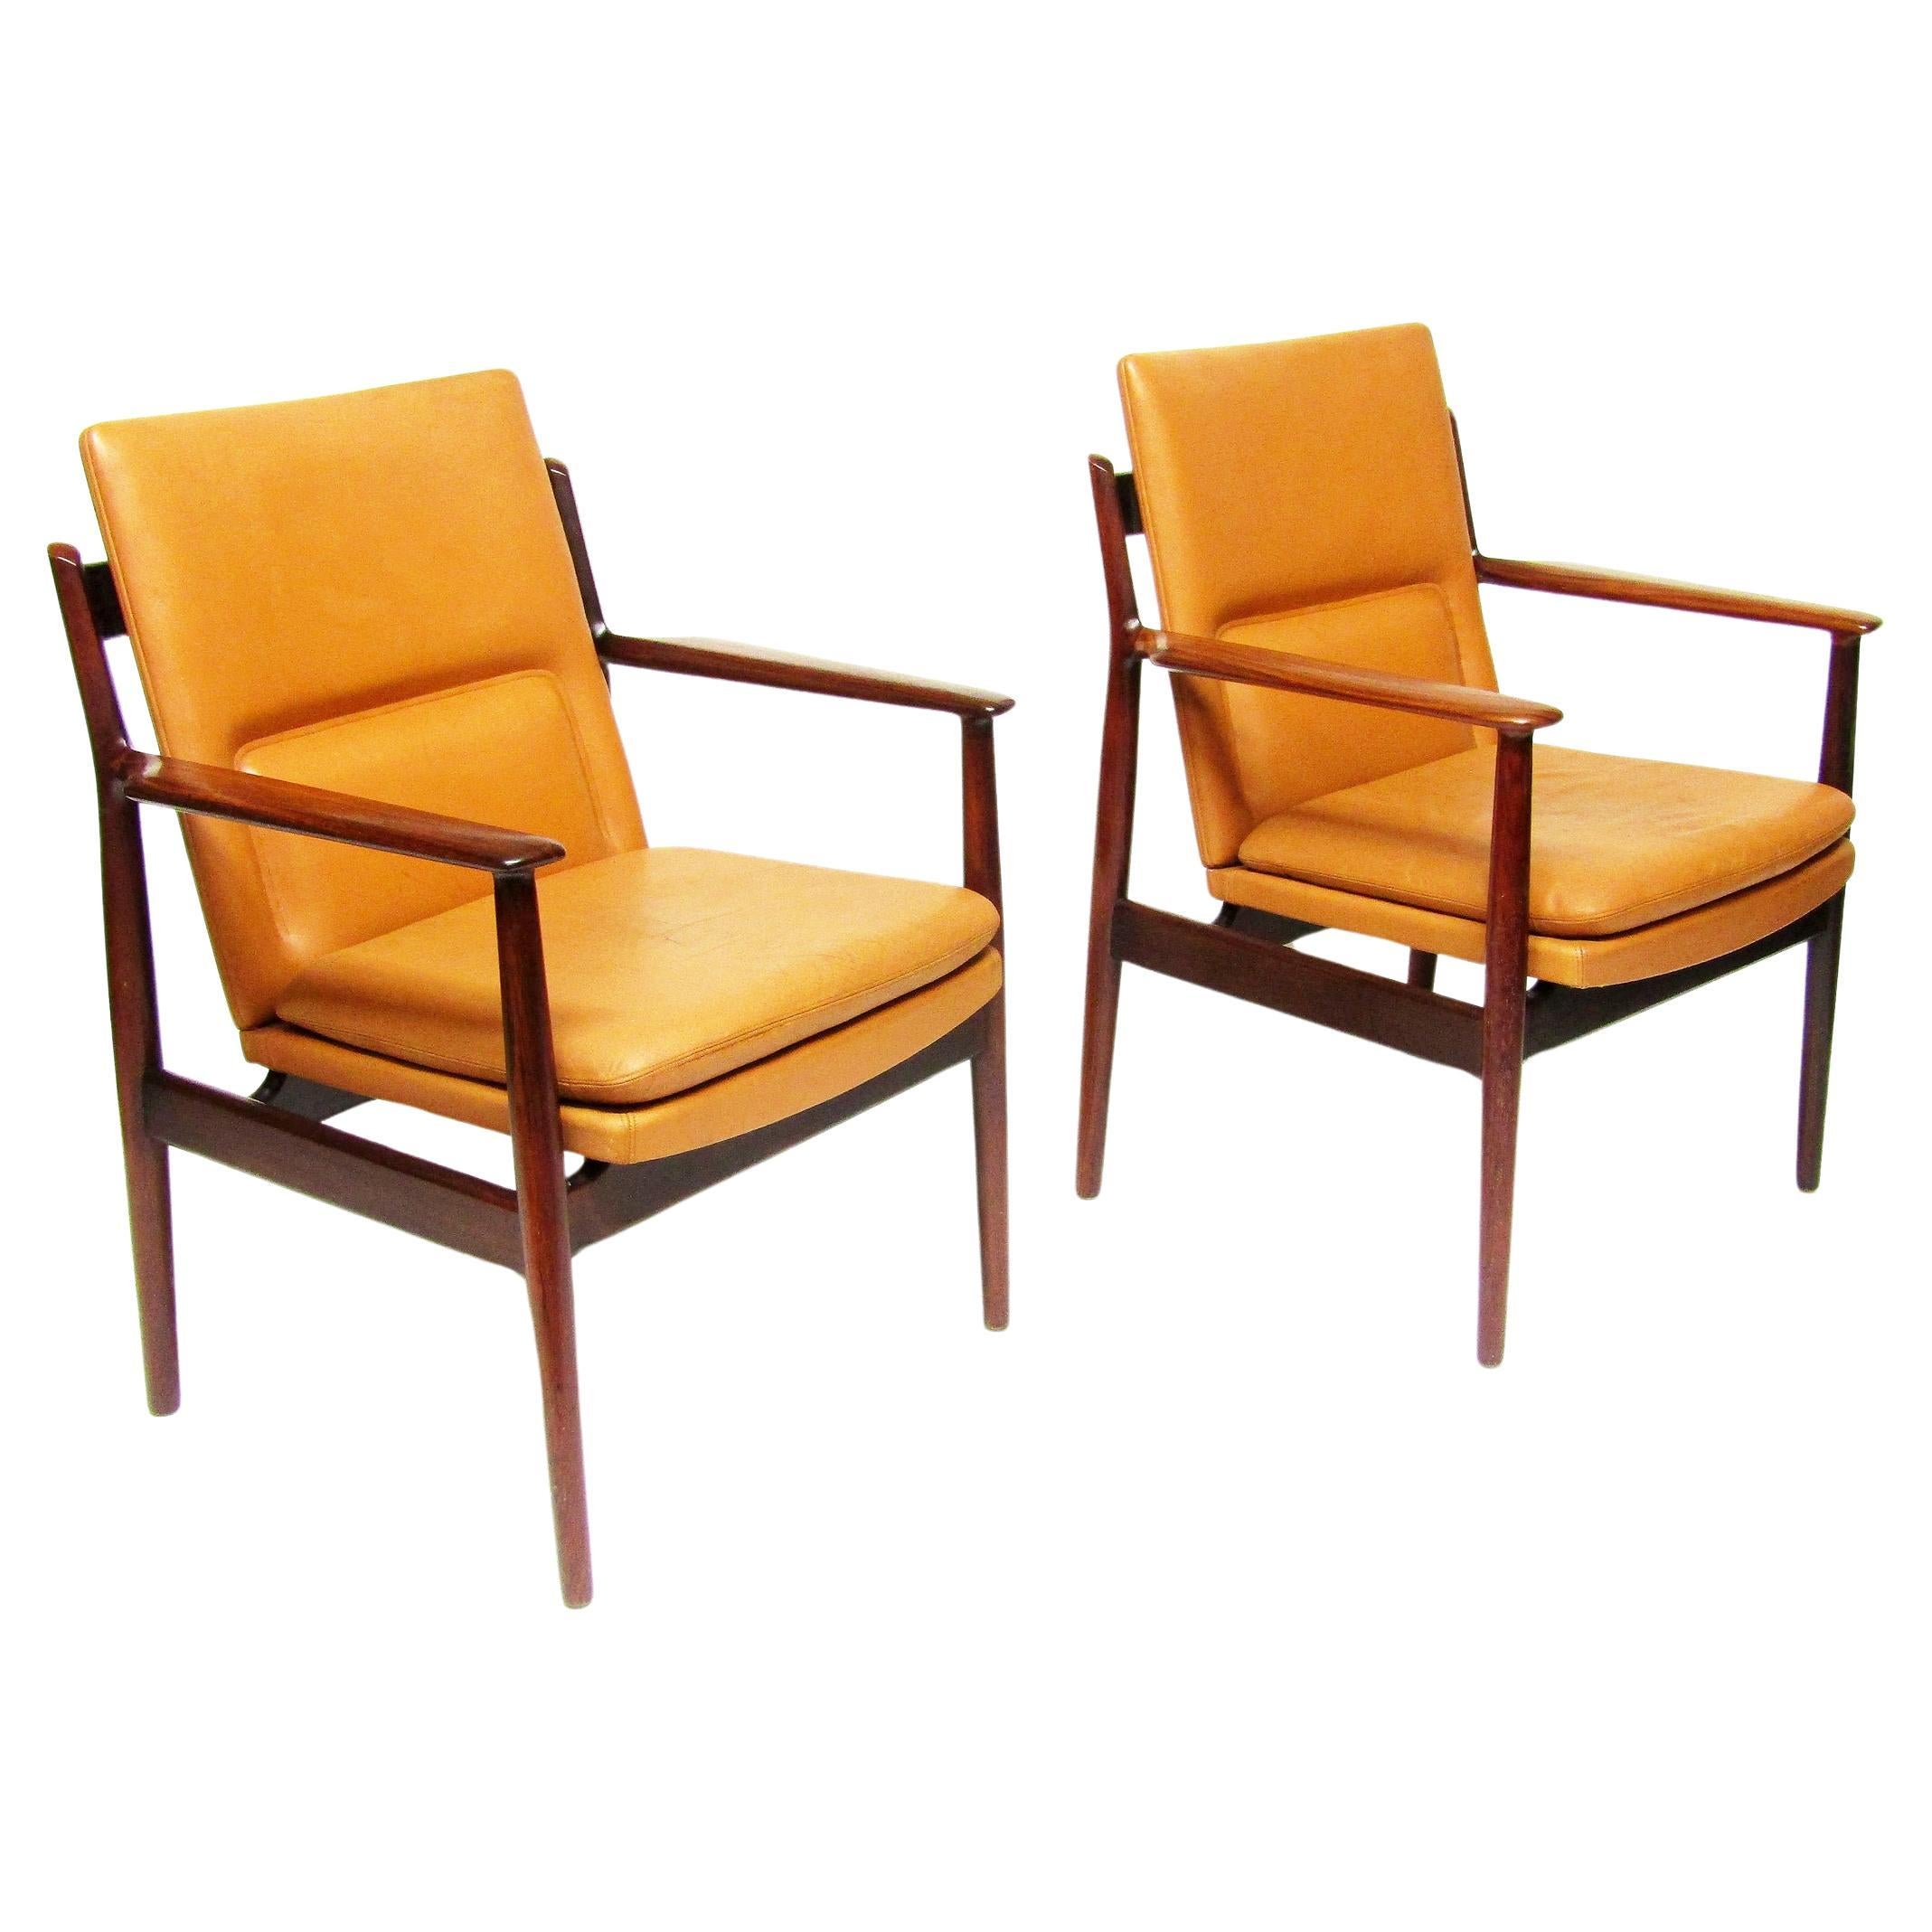 Two 1970s Danish "341" Chairs In Rosewood & Leather By Arne Vodder For Sibast For Sale